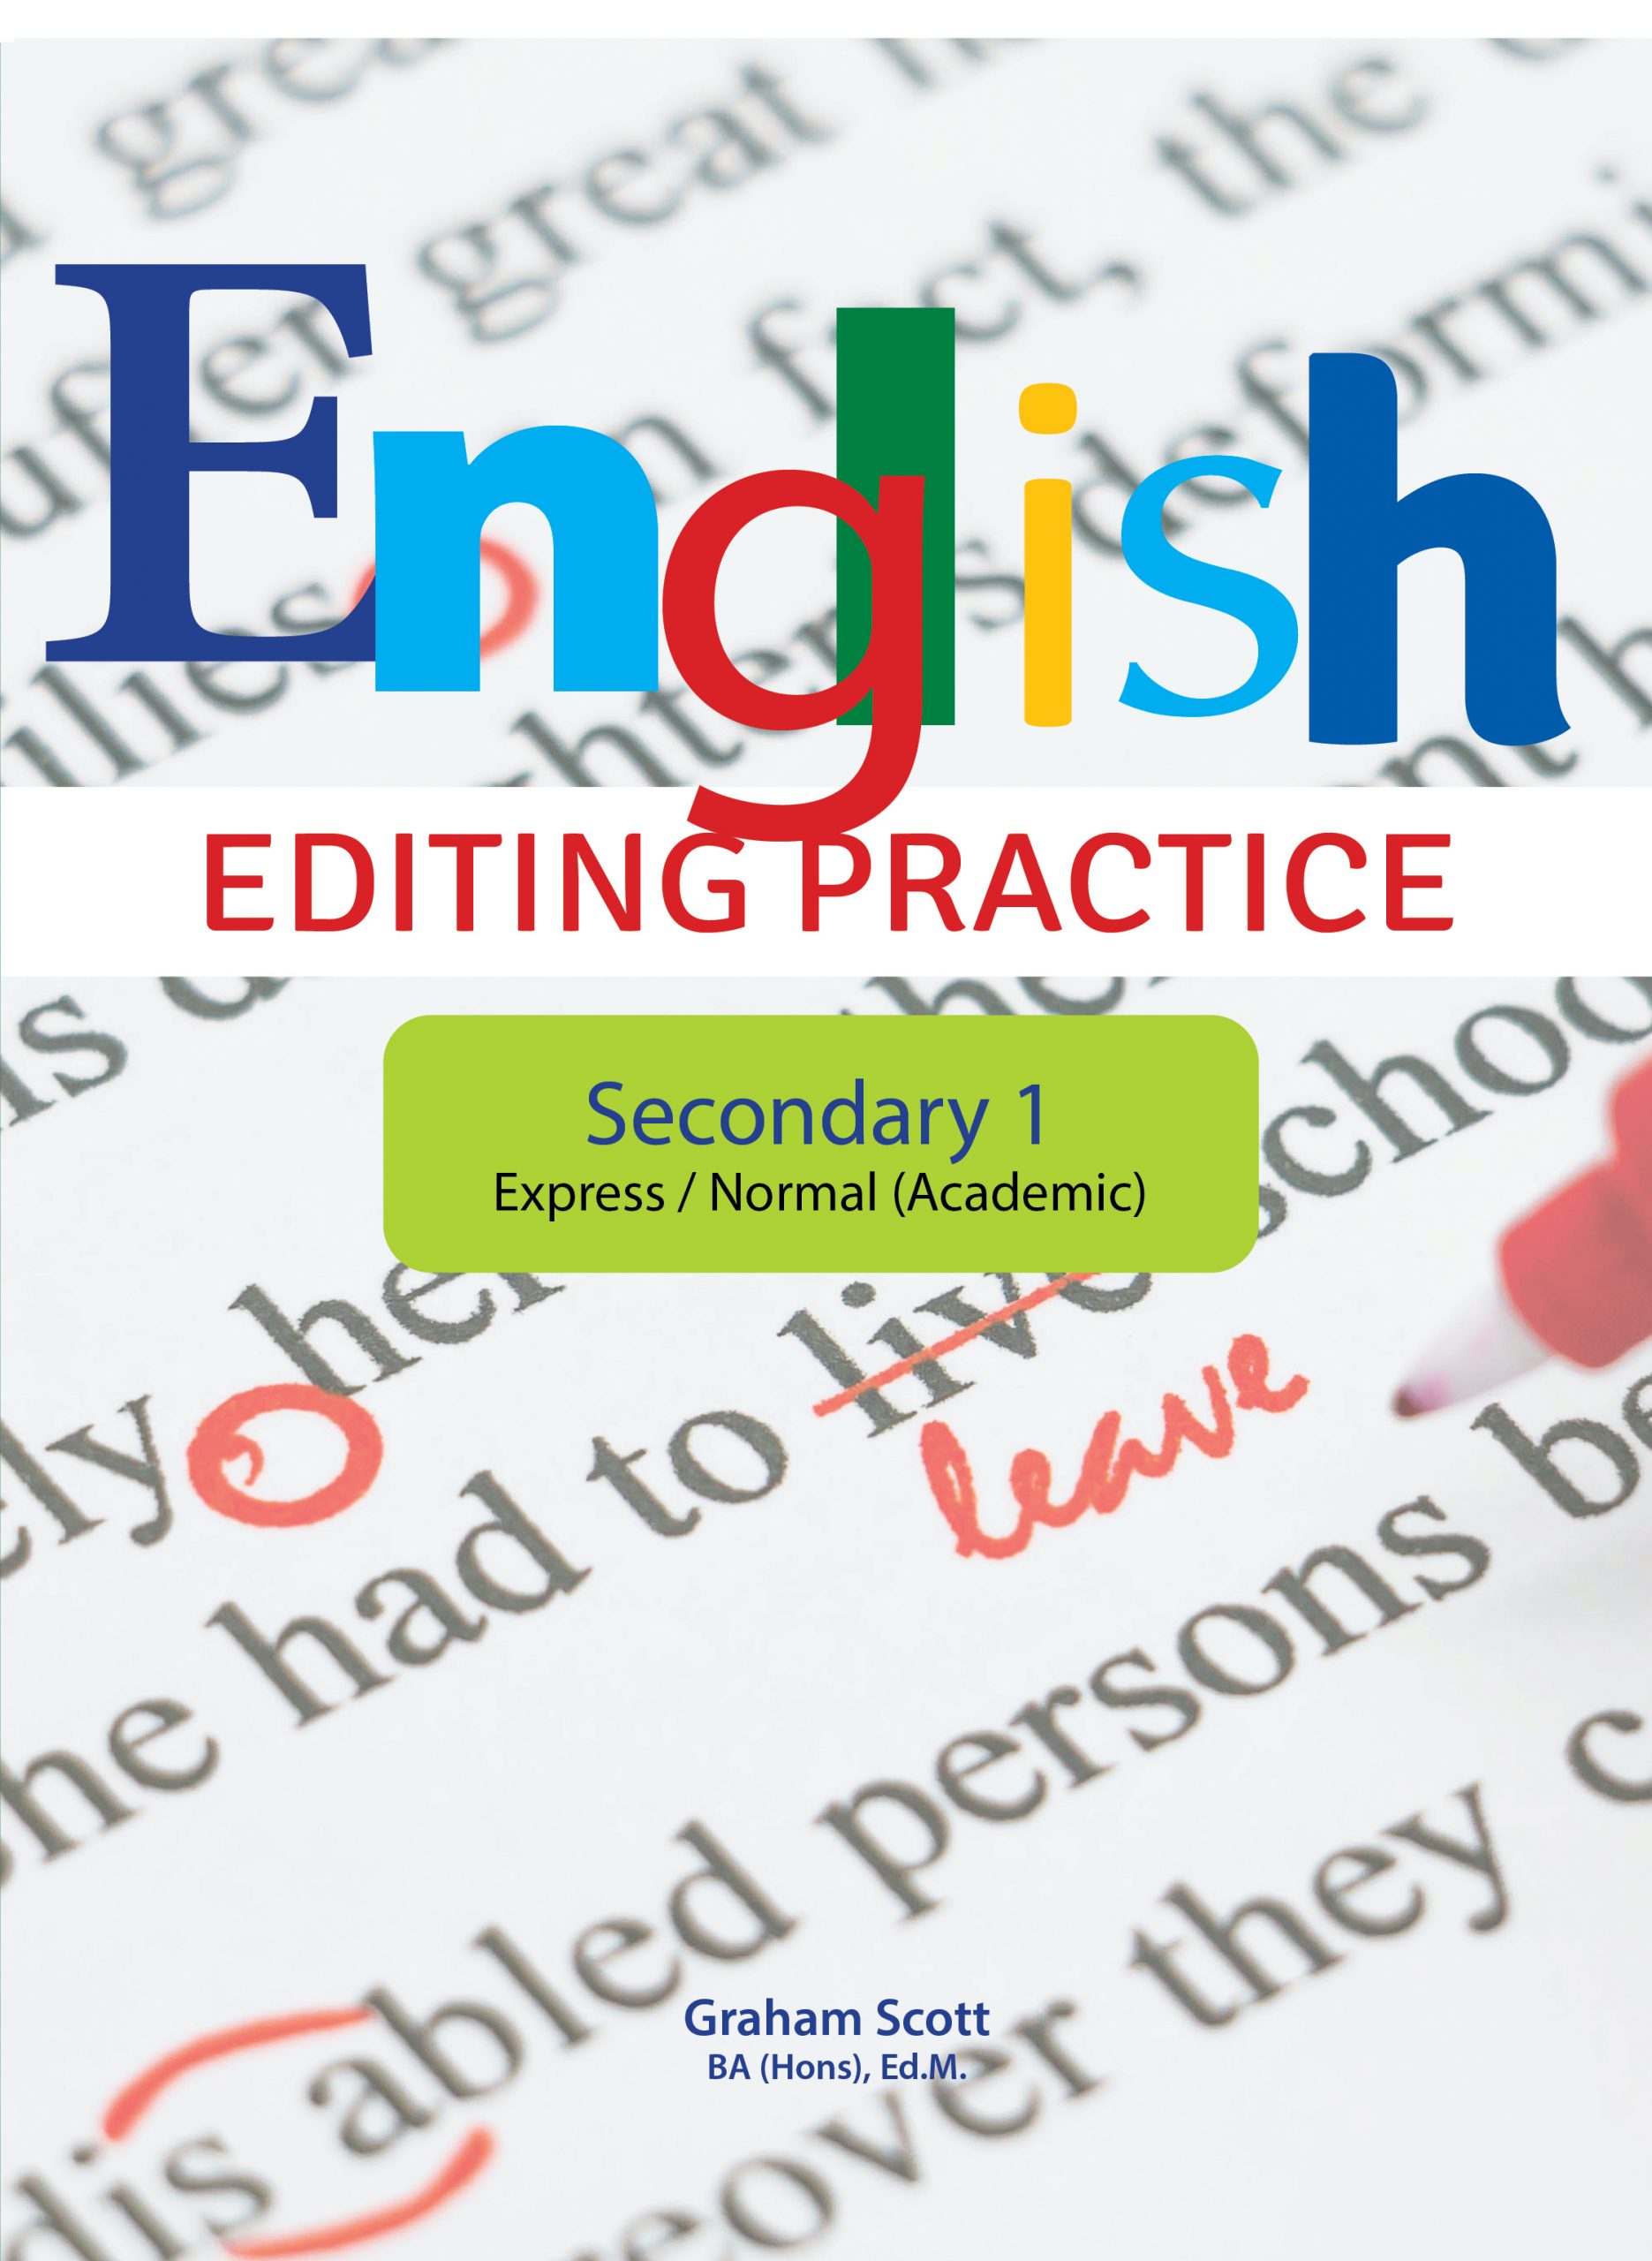 english-editing-practice-secondary-1-exp-n-a-cpd-singapore-education-services-pte-ltd